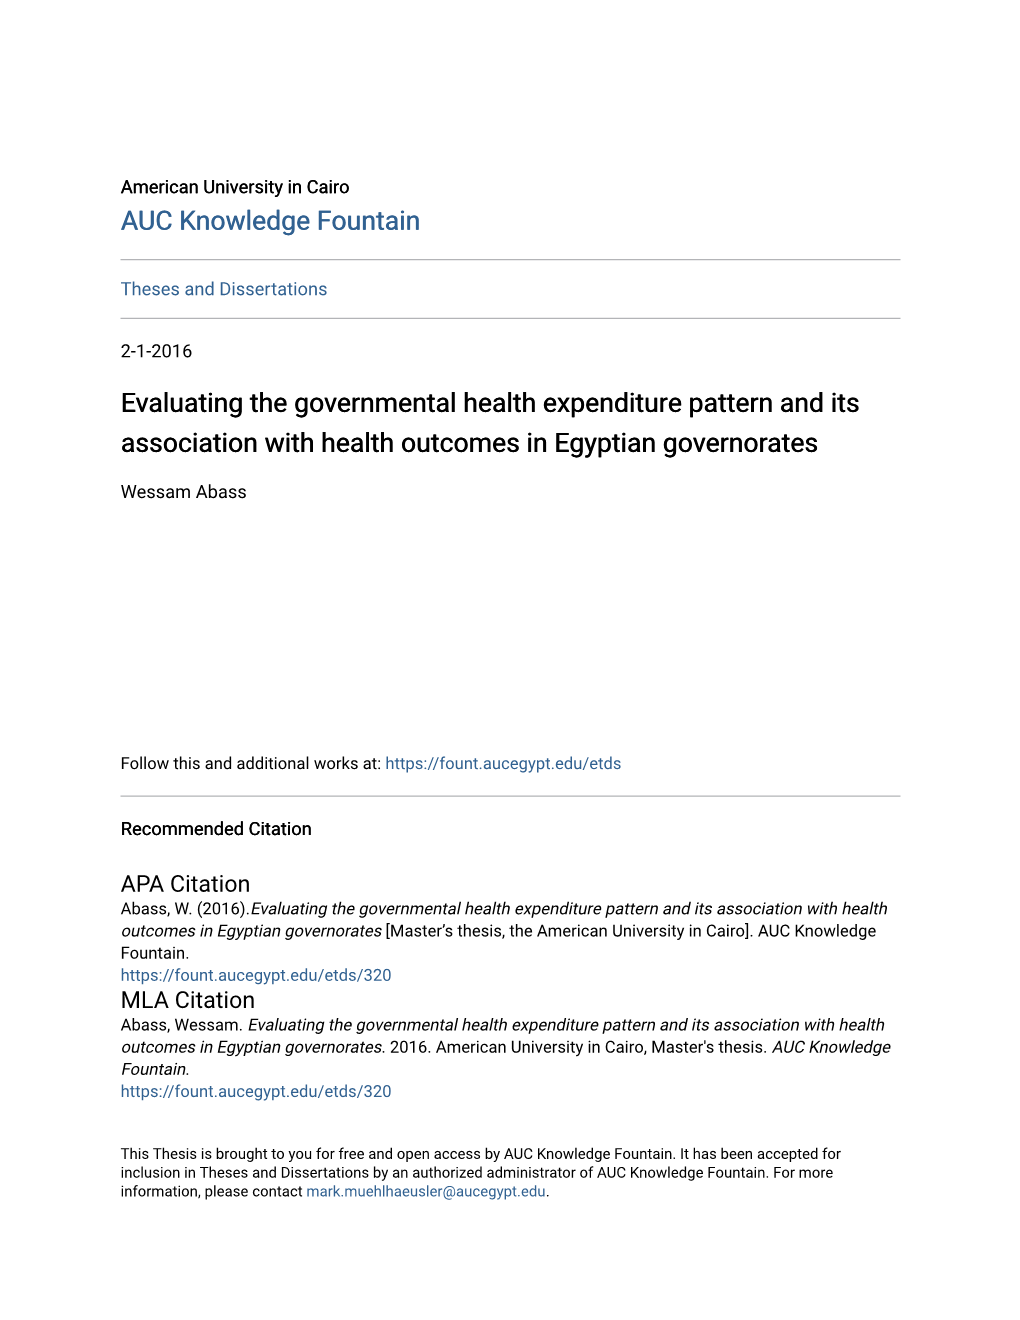 Evaluating the Governmental Health Expenditure Pattern and Its Association with Health Outcomes in Egyptian Governorates